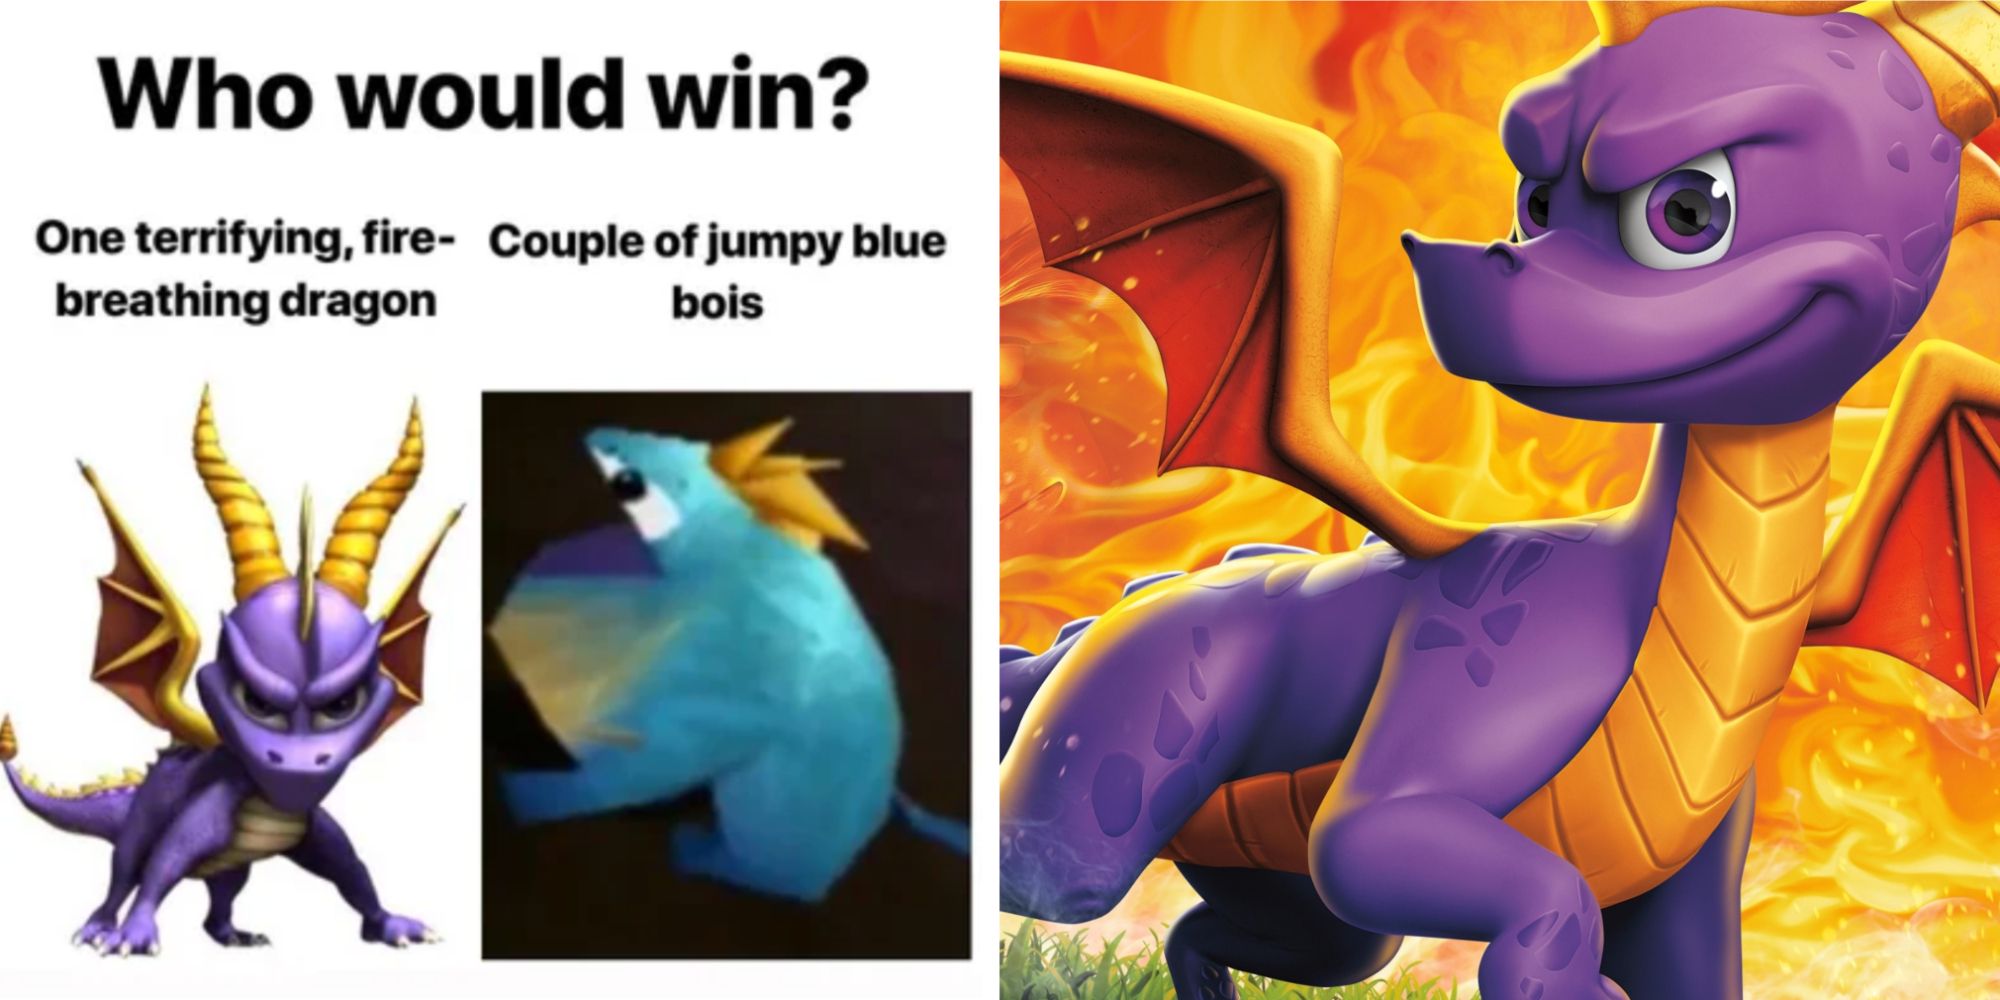 Spyro the Dragon: 10 Memes That Perfectly Sum Up The Games